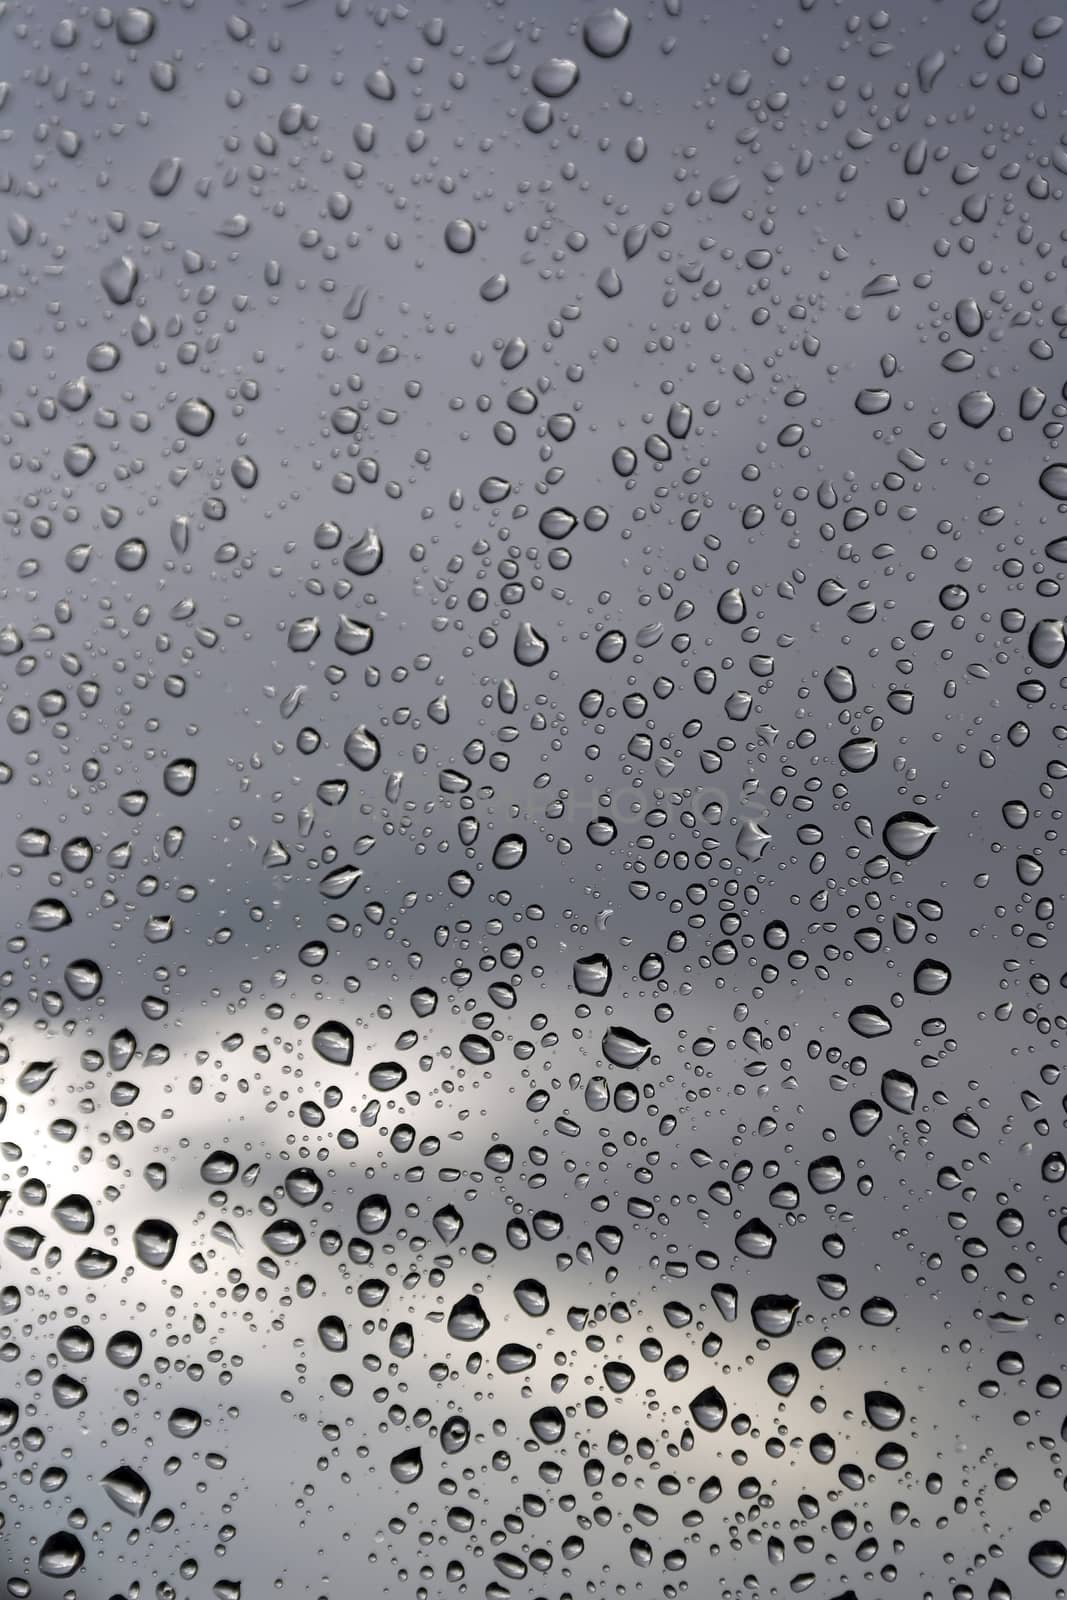 Water drops on a window glass, rainy day by sergpet